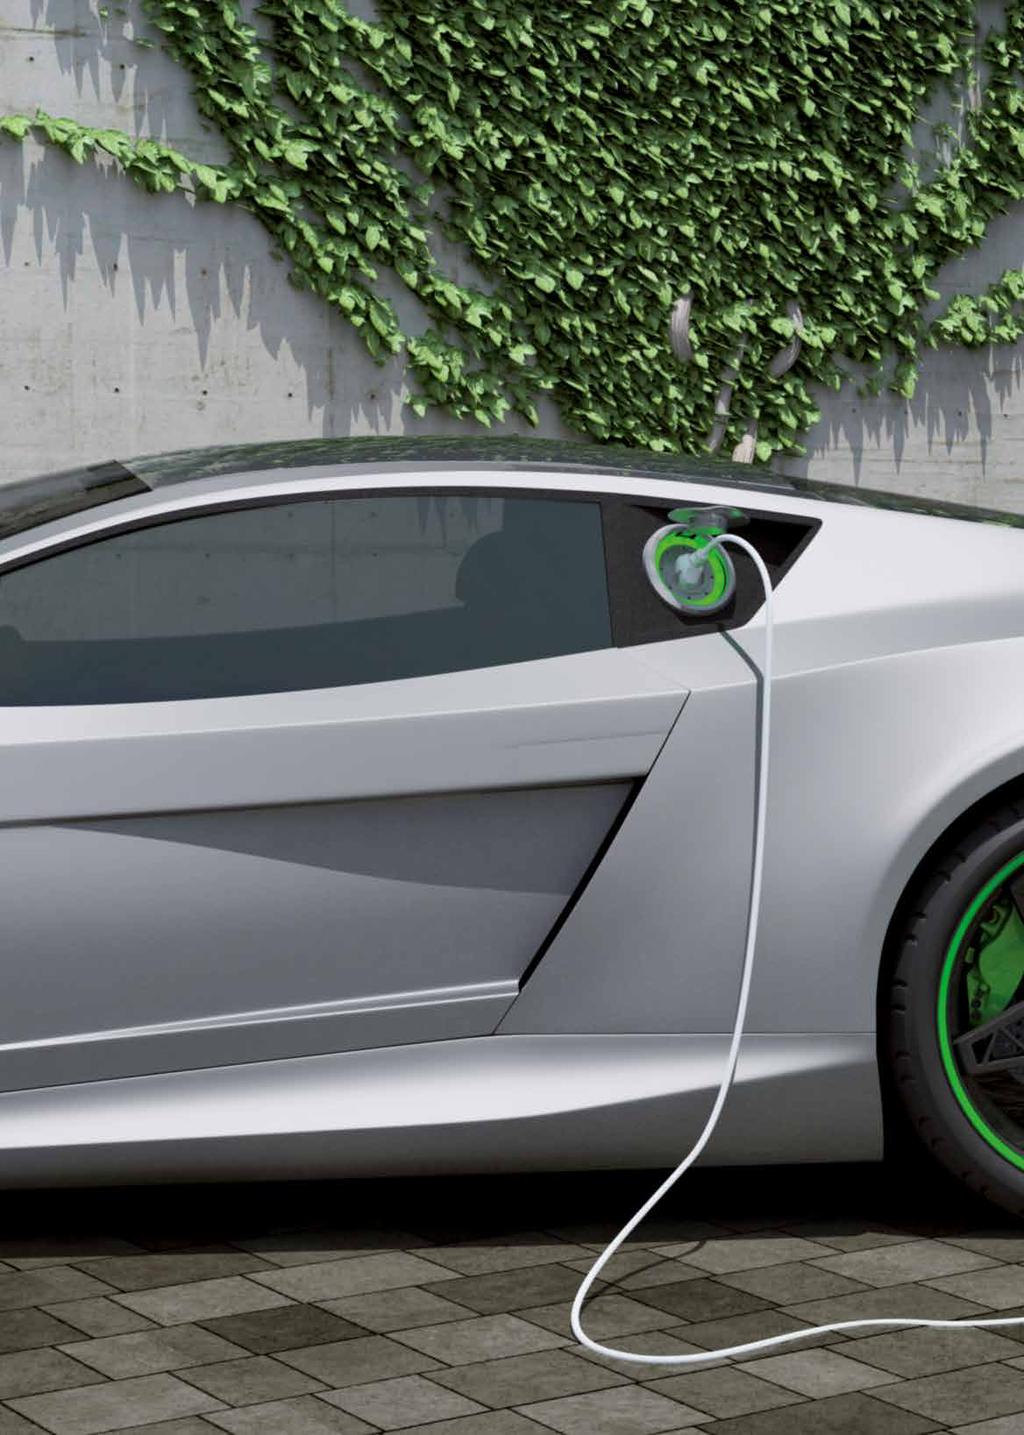 THE BRAIN OF e-mobility Highly-efficient power conversion is a vital process for e-mobility.